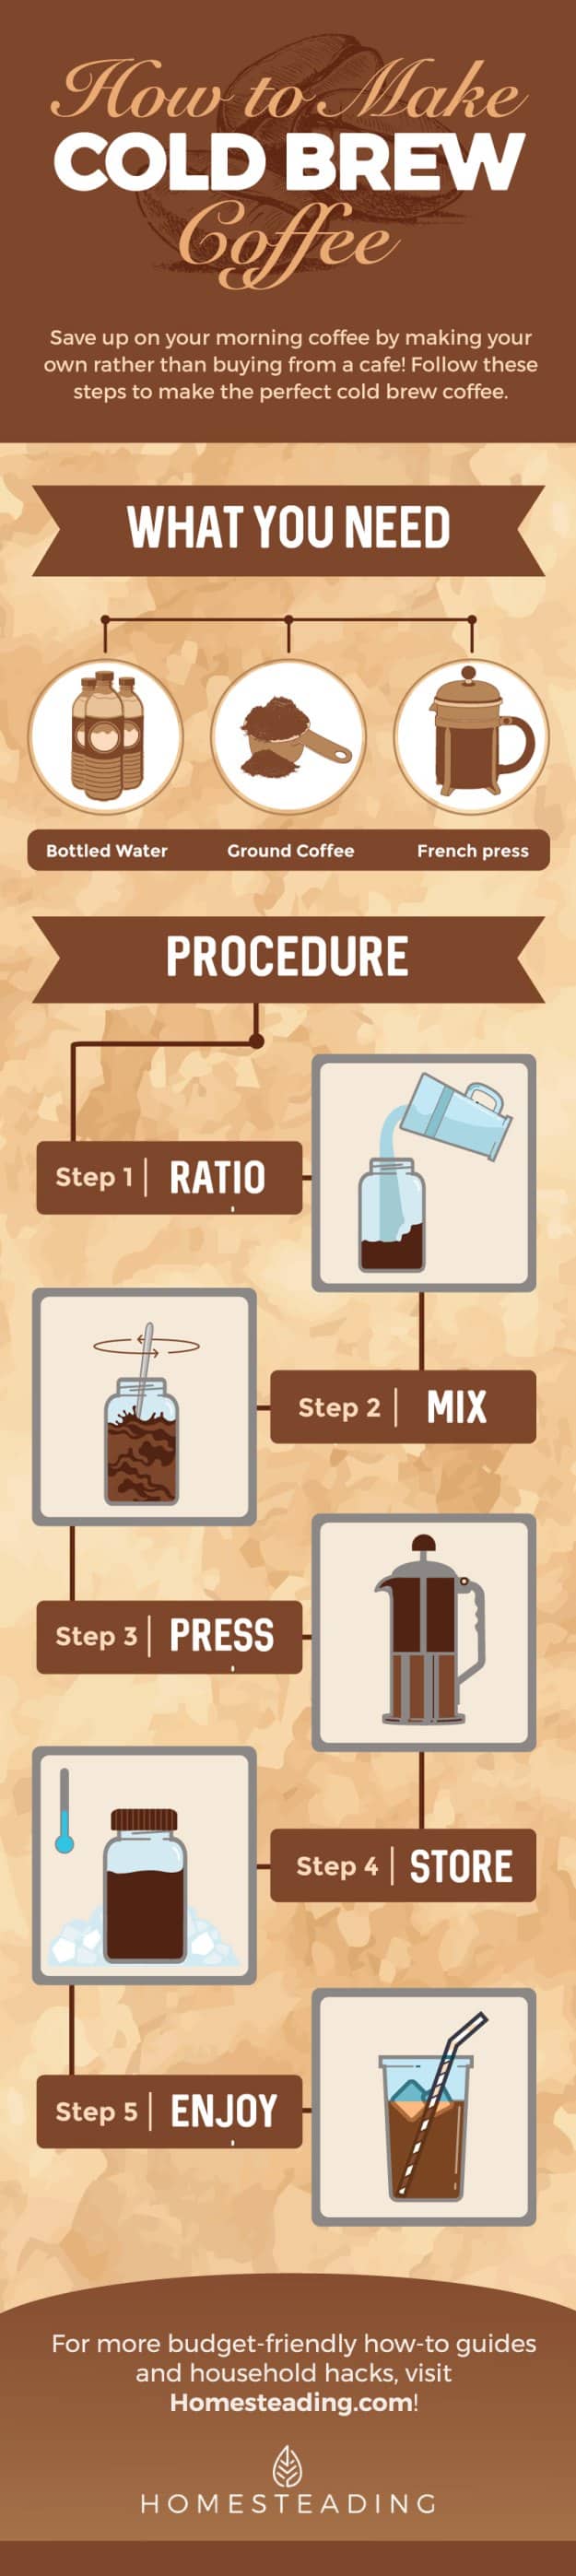 How To Make Cold Brew Coffee | Homesteading 101